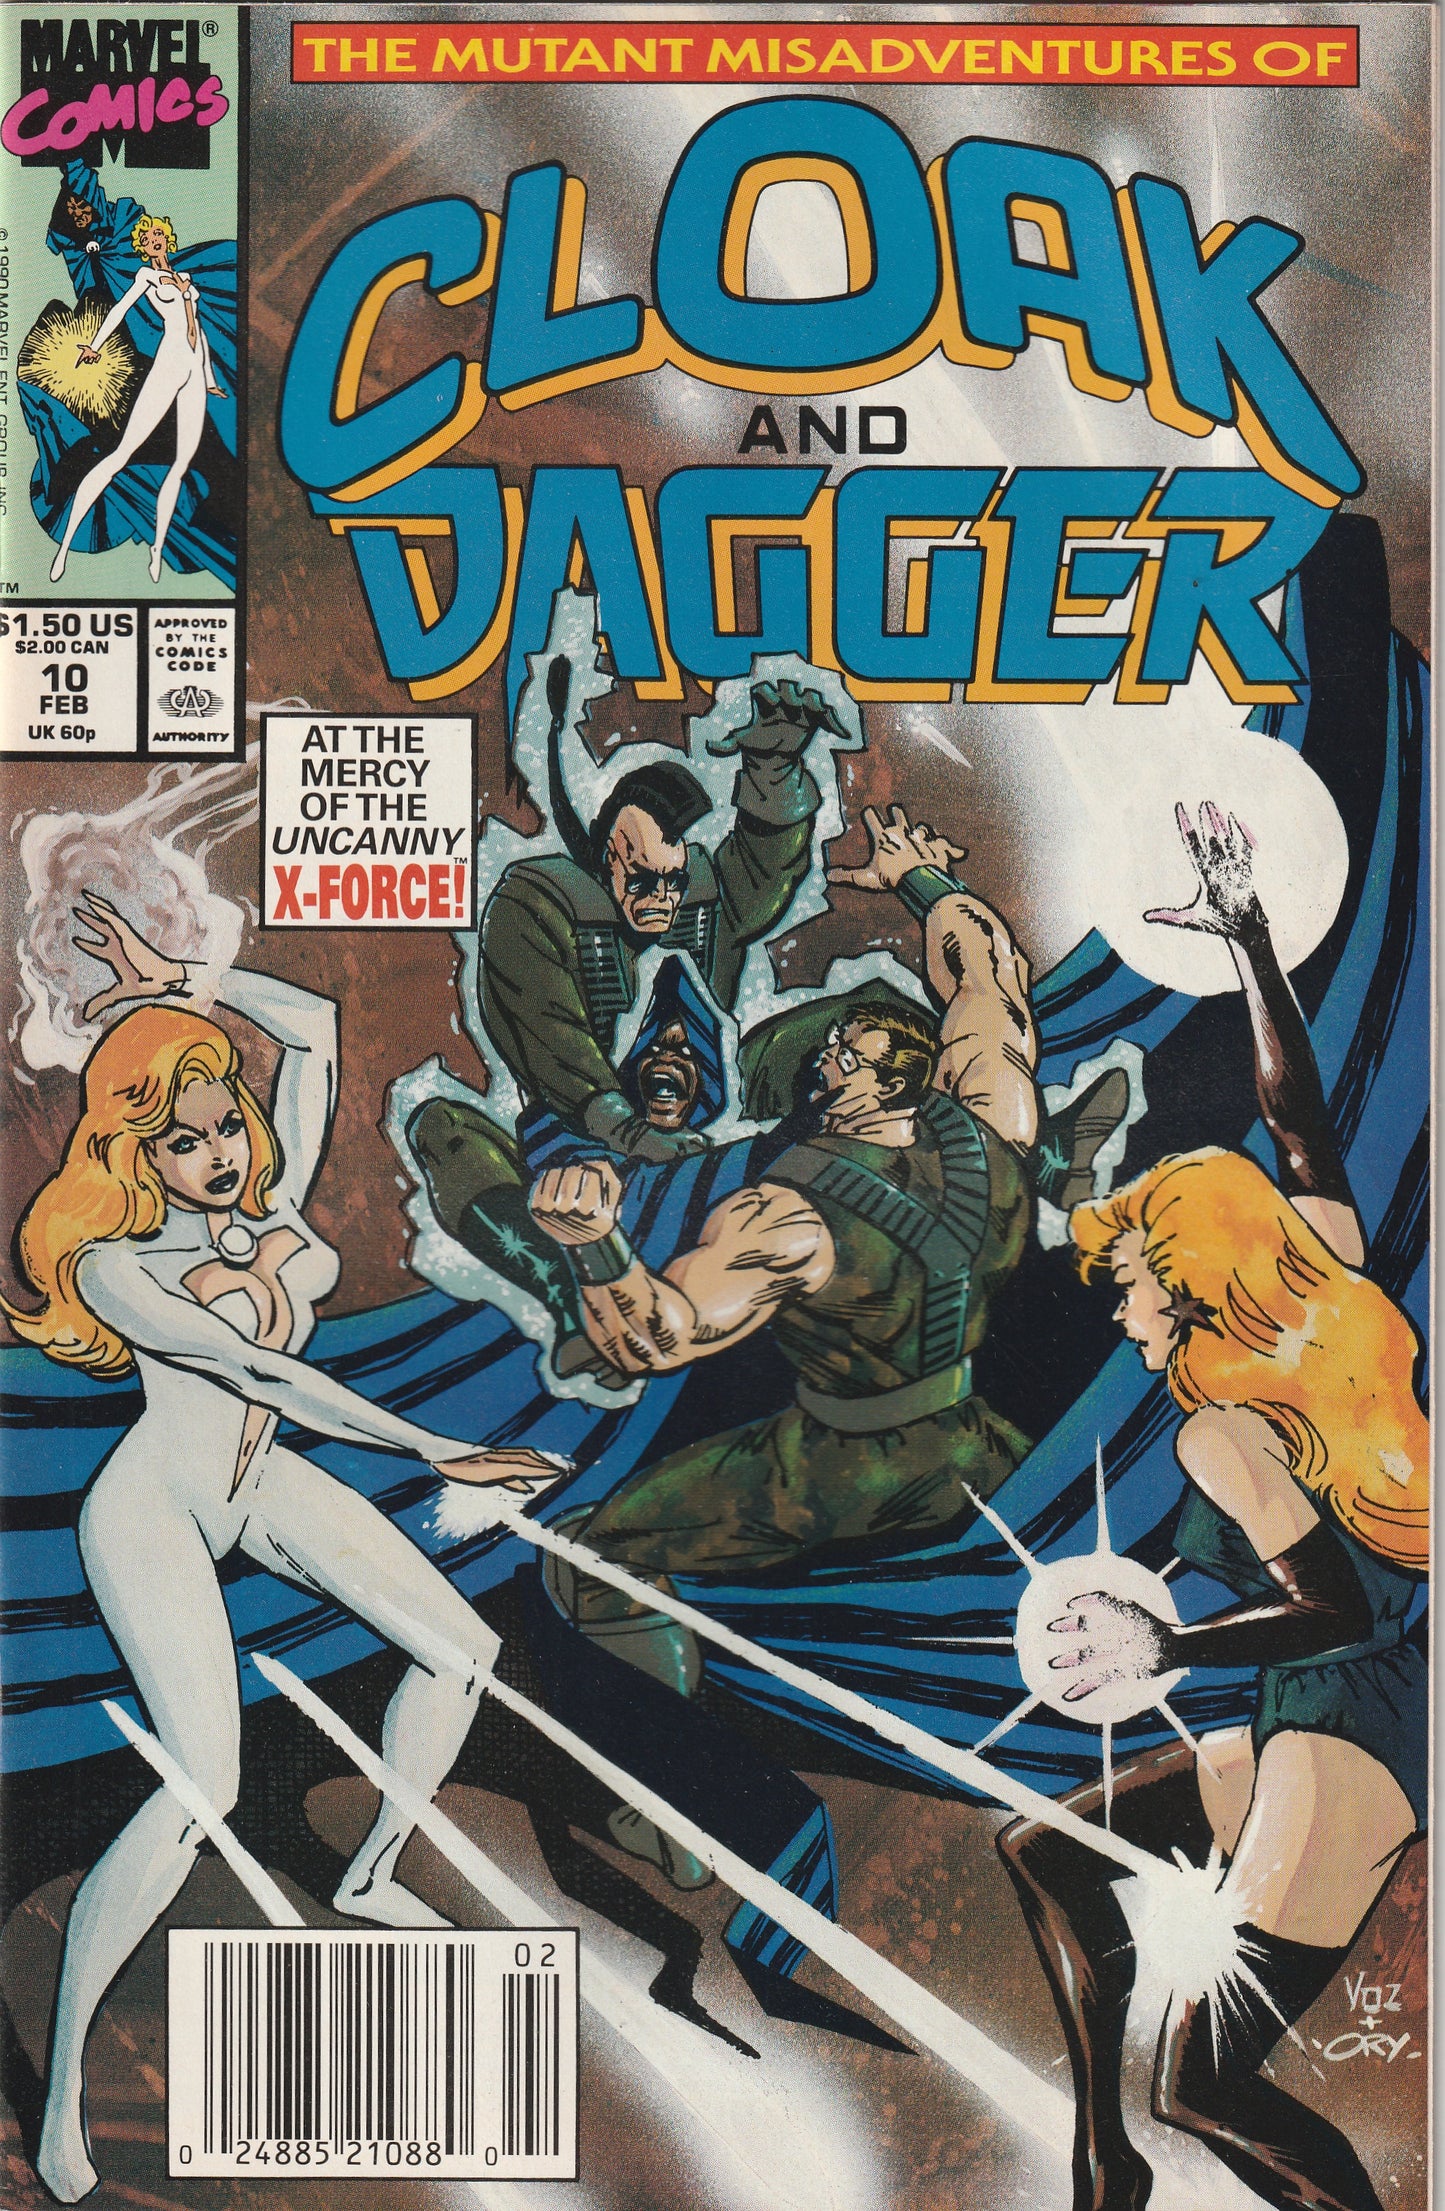 The Mutant Misadventures of Cloak and Dagger #10 (1990)